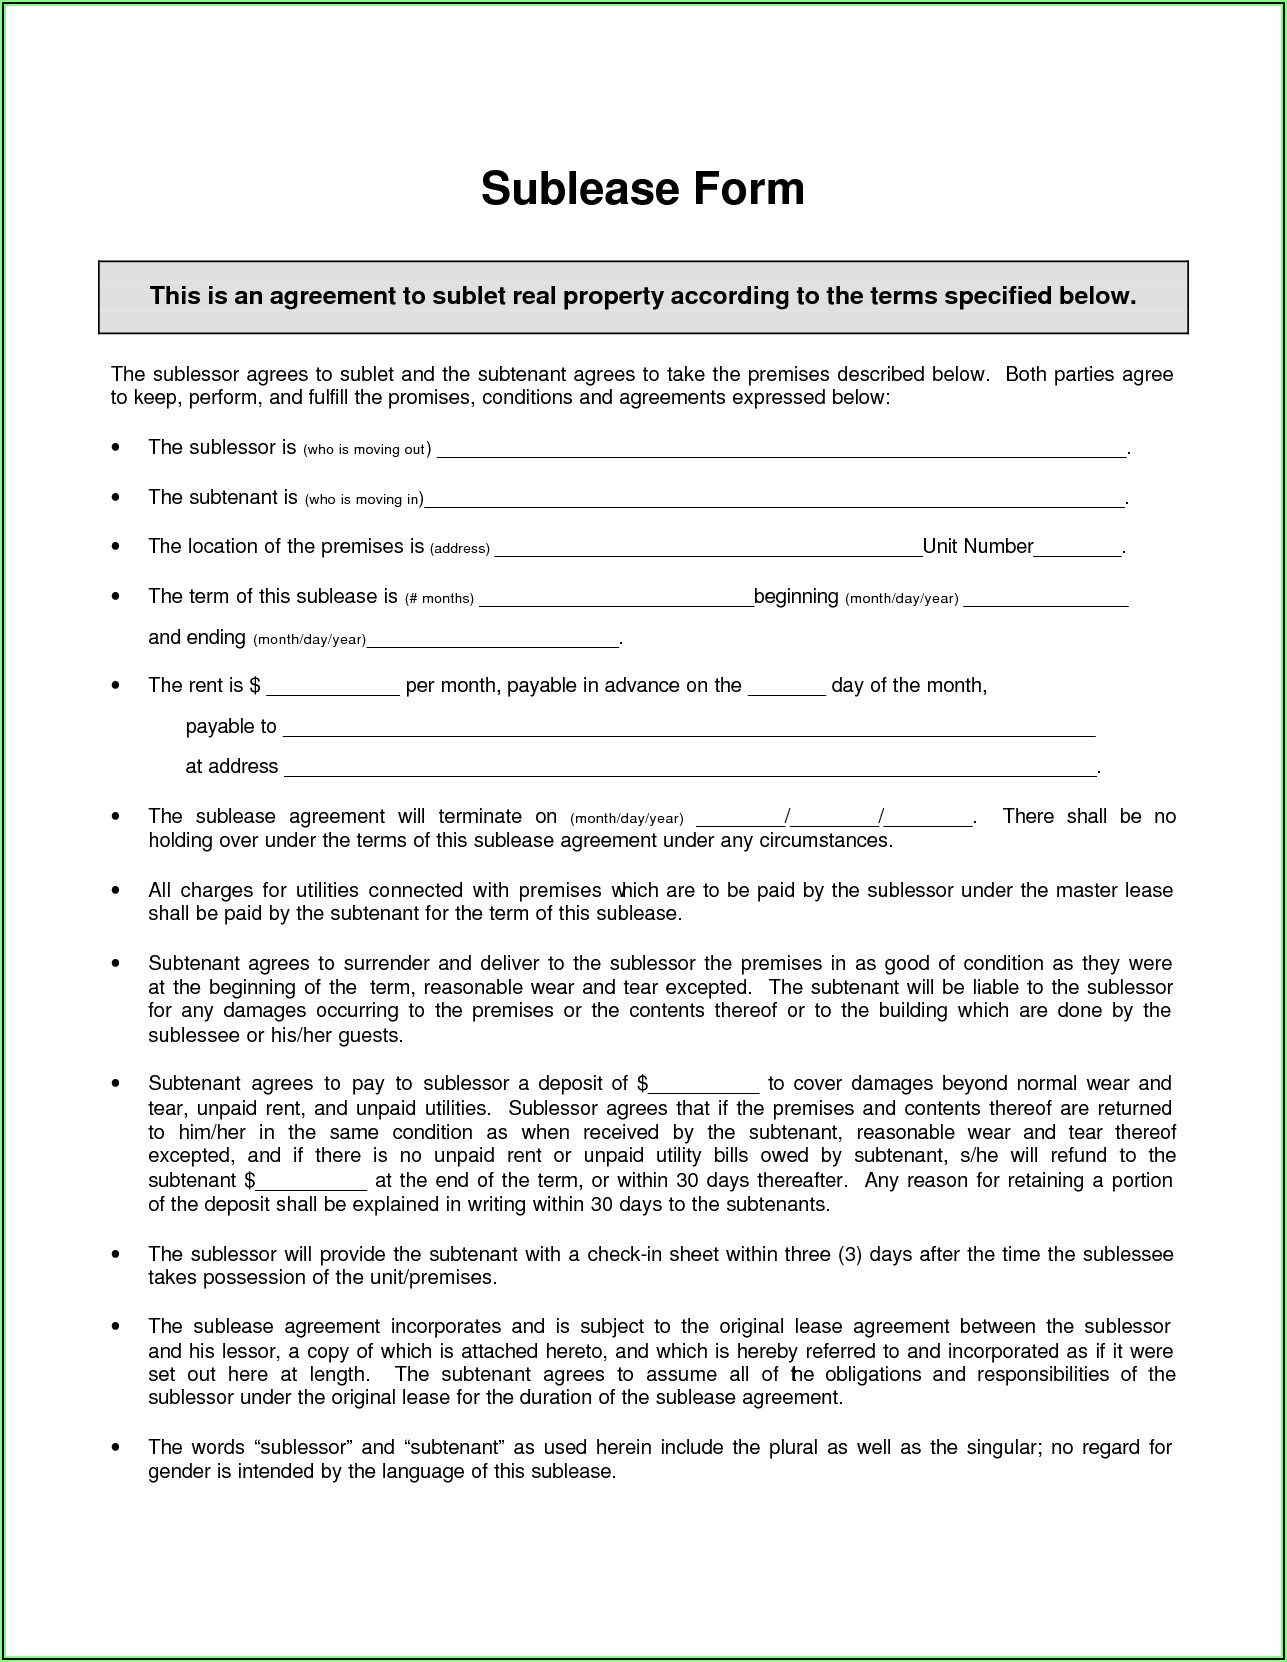 Sublease Rental Agreement Format India